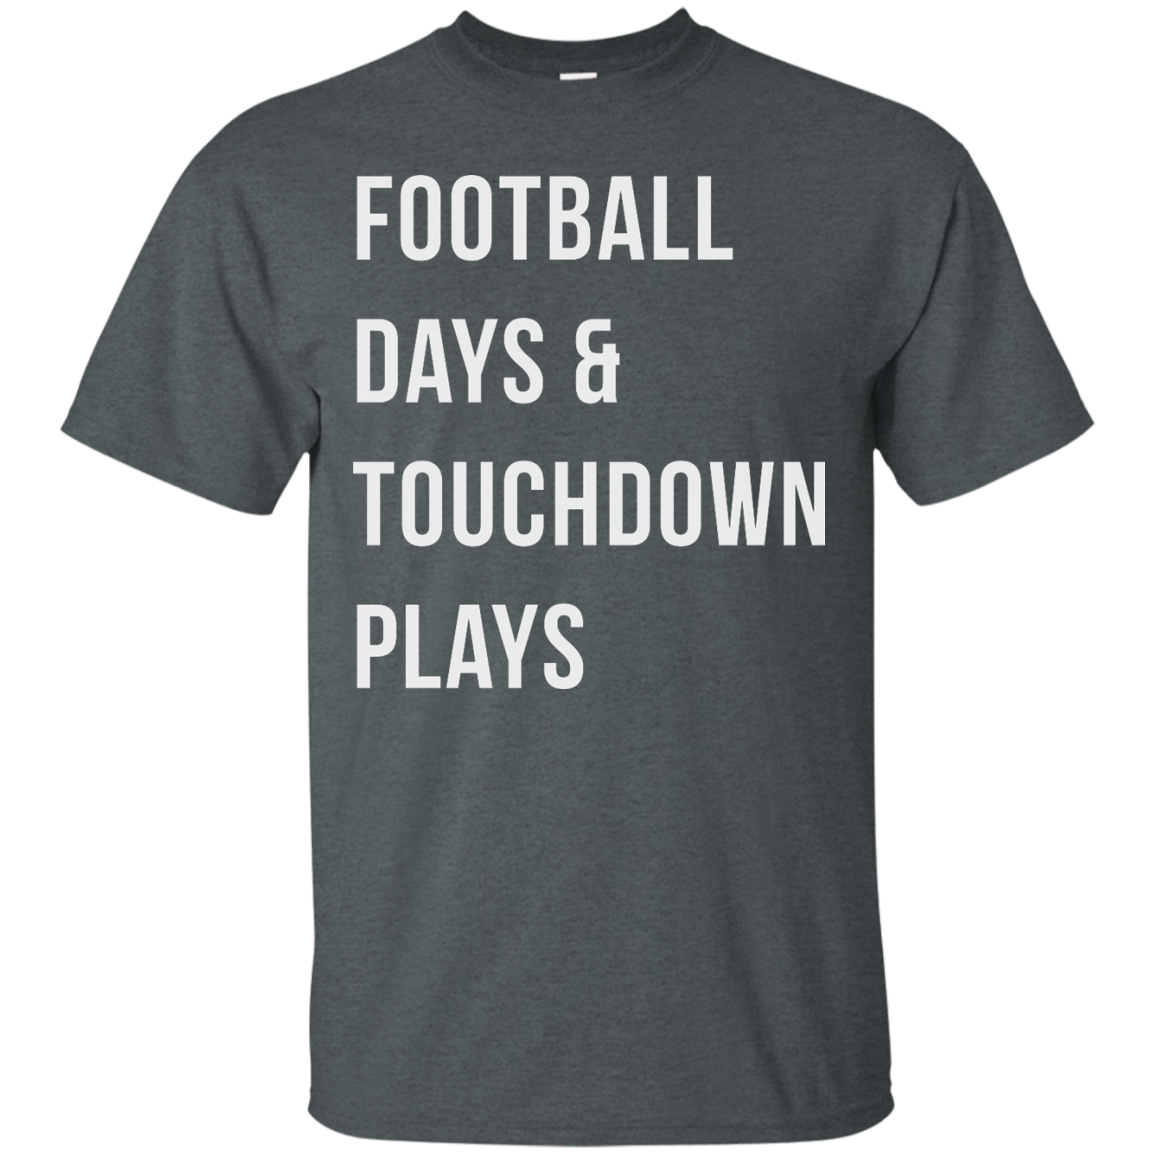 Football days and touchdown plays t-shirt, tank, hoodie